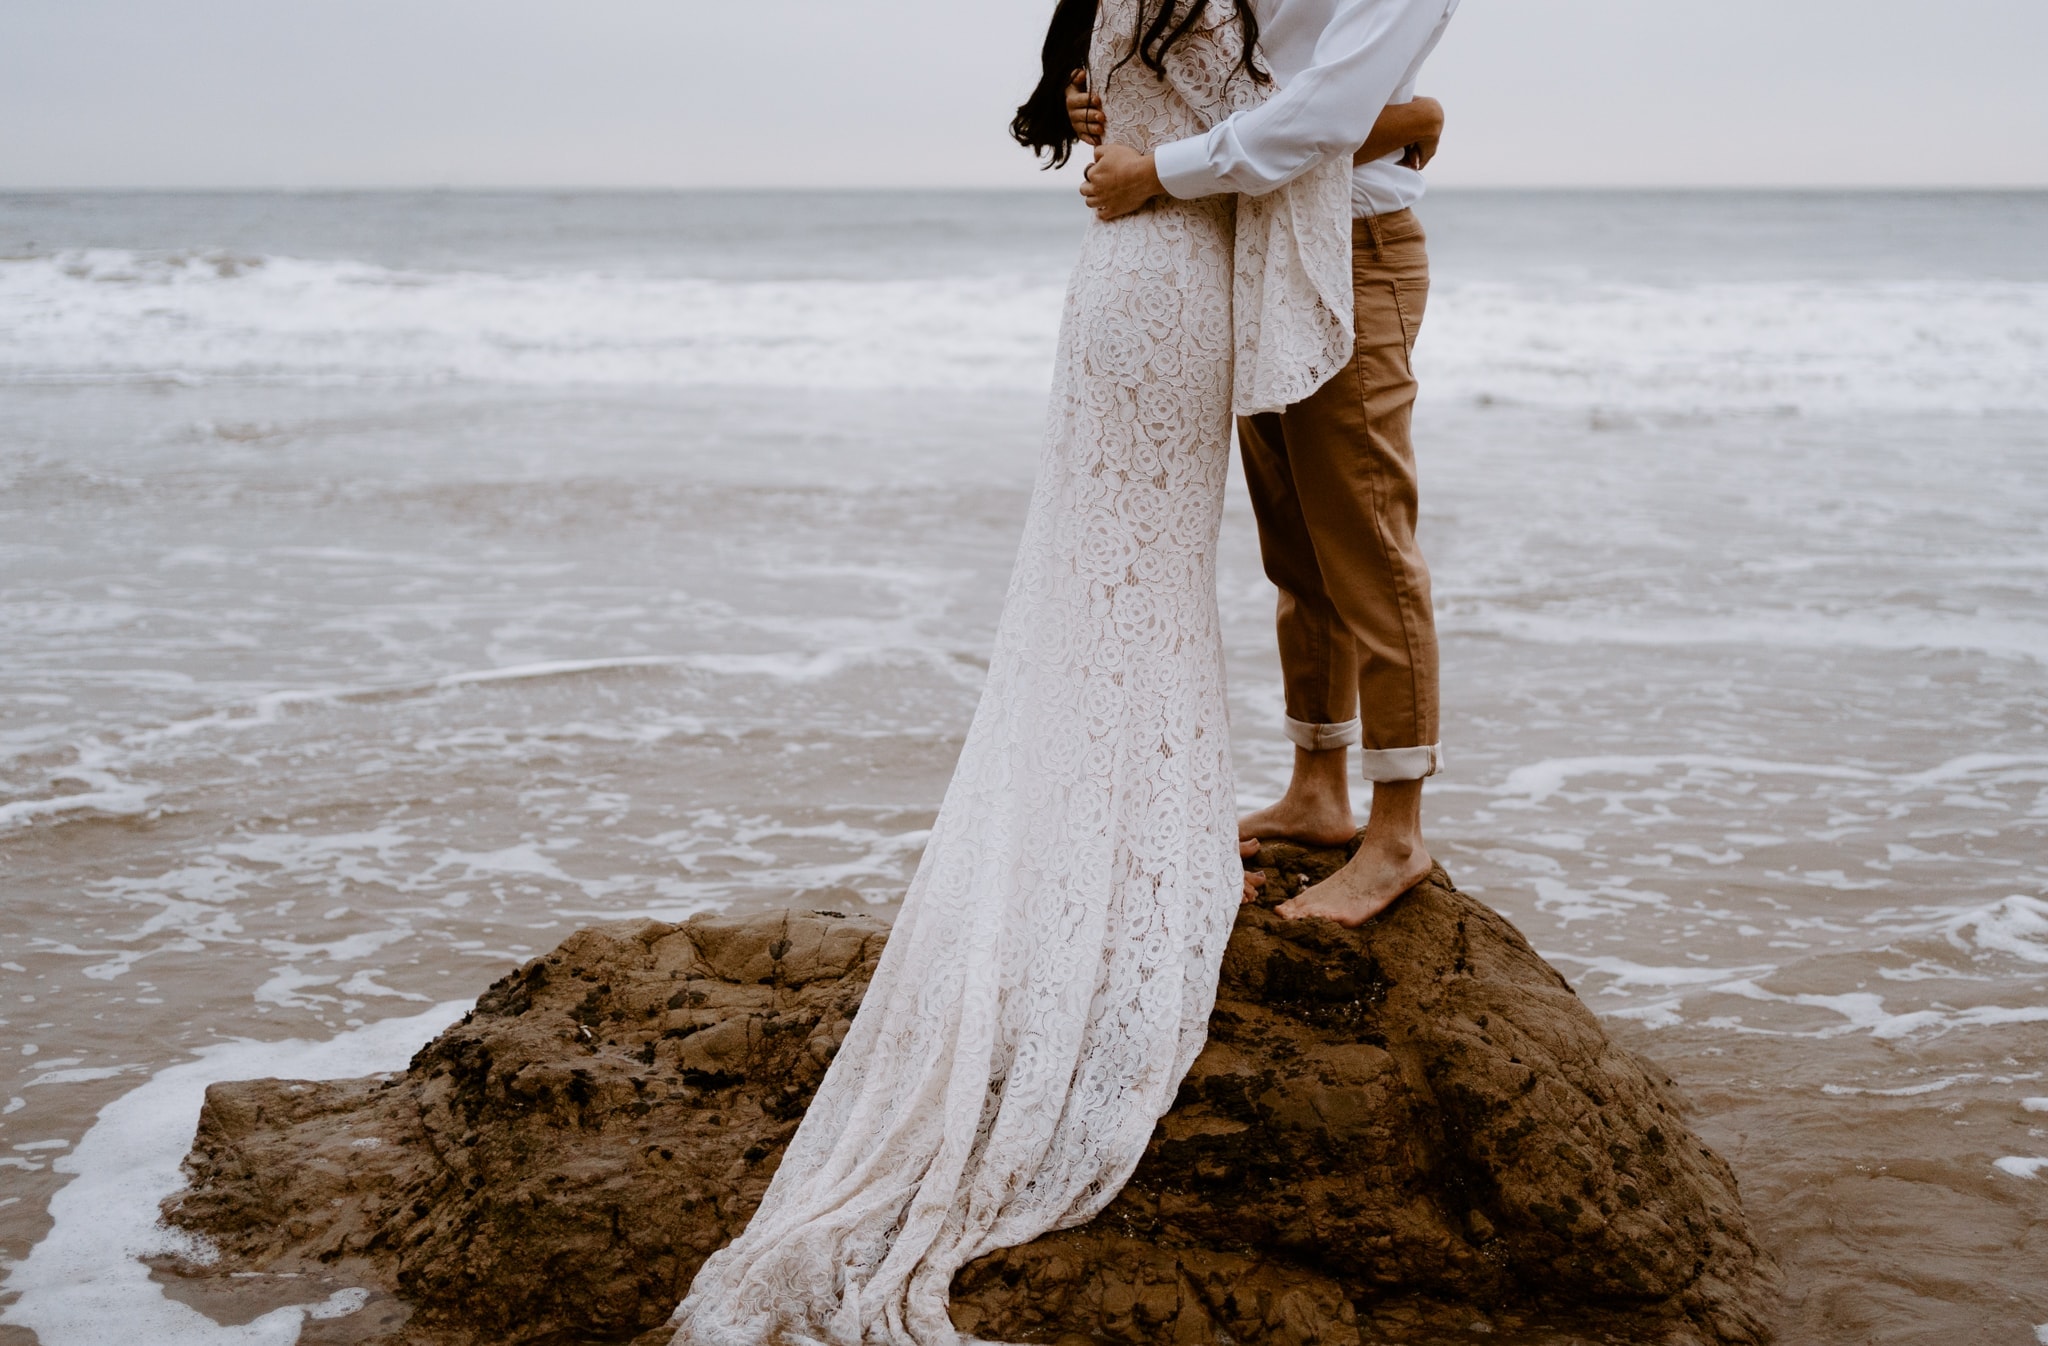 A detailed view of a couple standing on a rock, surrounded by the sea, focused on their embrace and the woman's lace wedding dress.